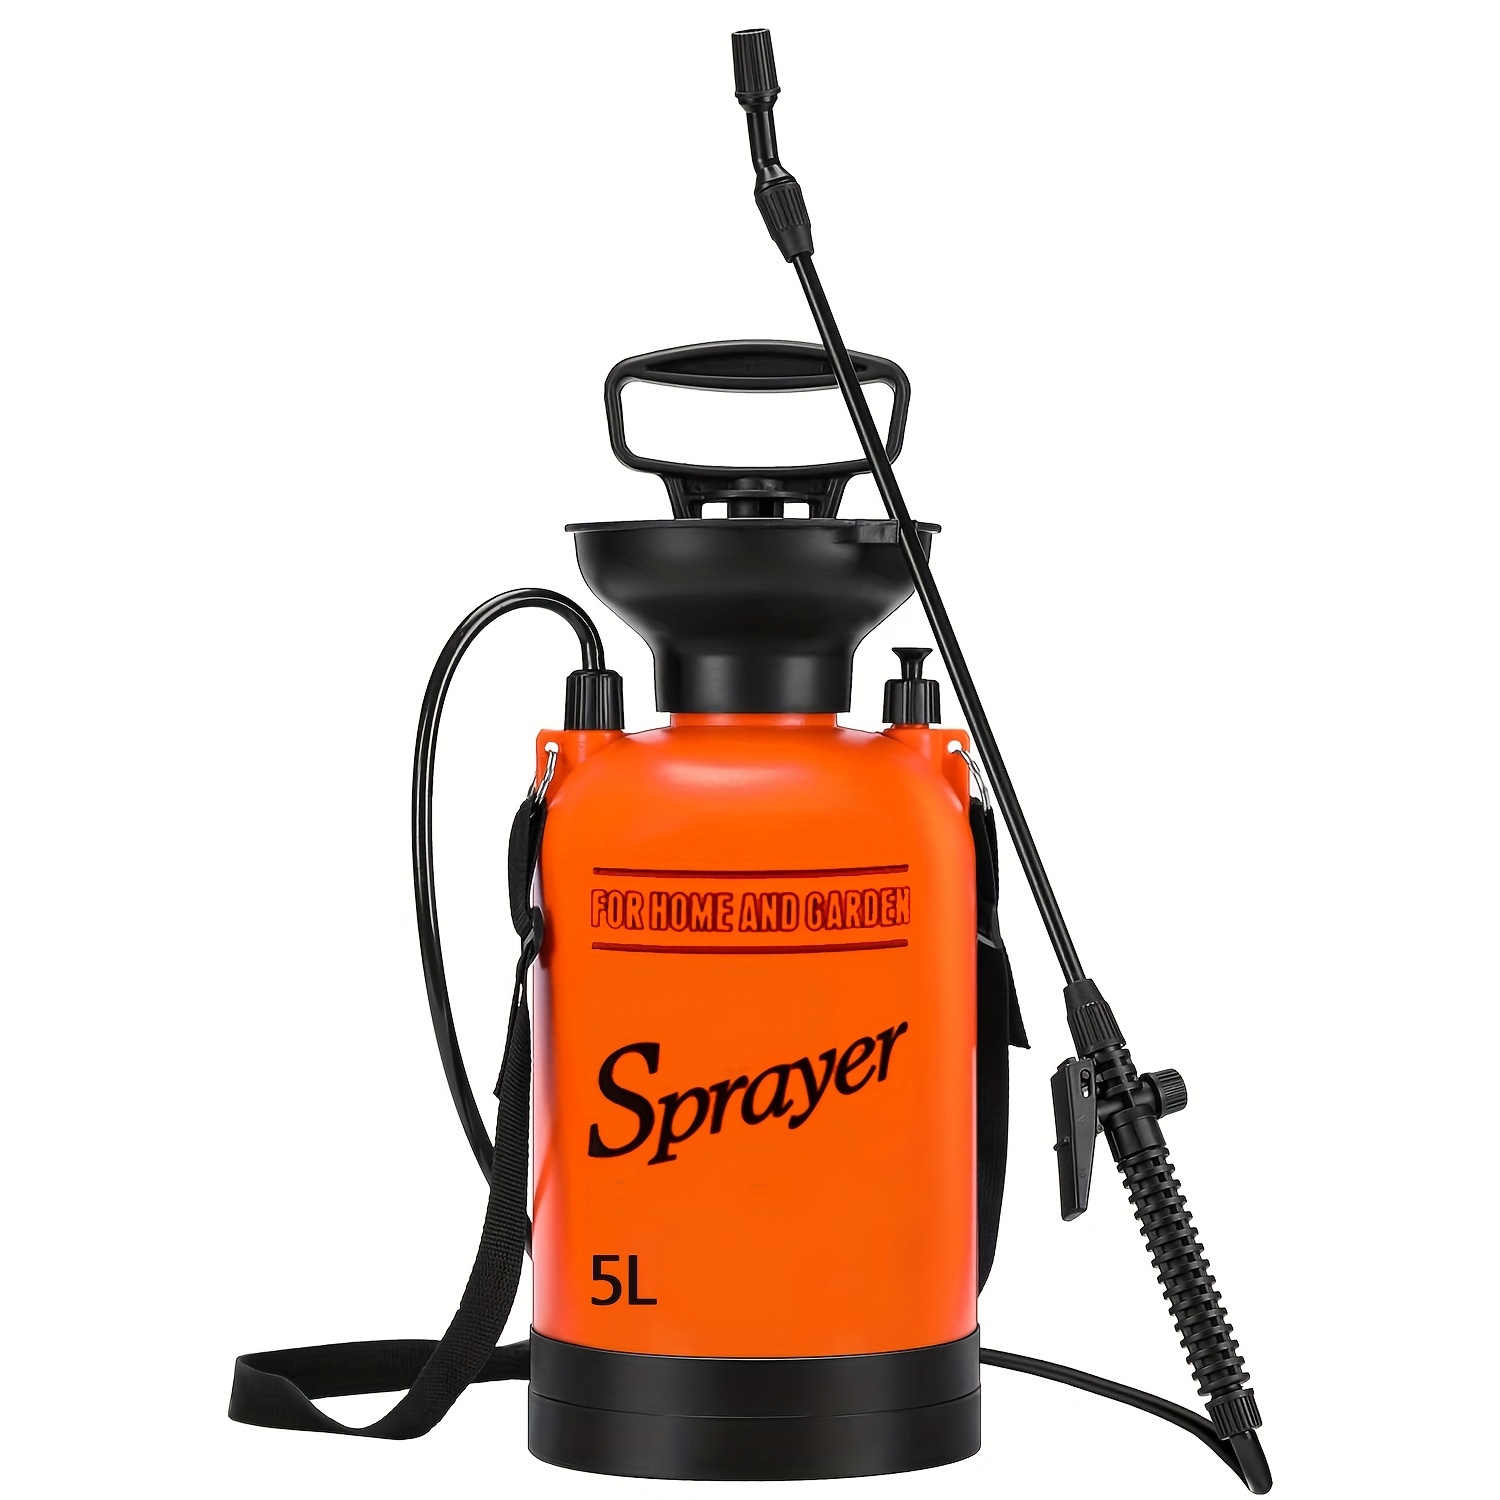 

1 Set, 0.8-2 Gallon/ 5l Pump Pressure Sprayer, Pressurized Lawn & Garden Water Spray Bottle With Adjustable Shoulder Strap, For Spraying Plants, Garden Watering And Household Cleaning